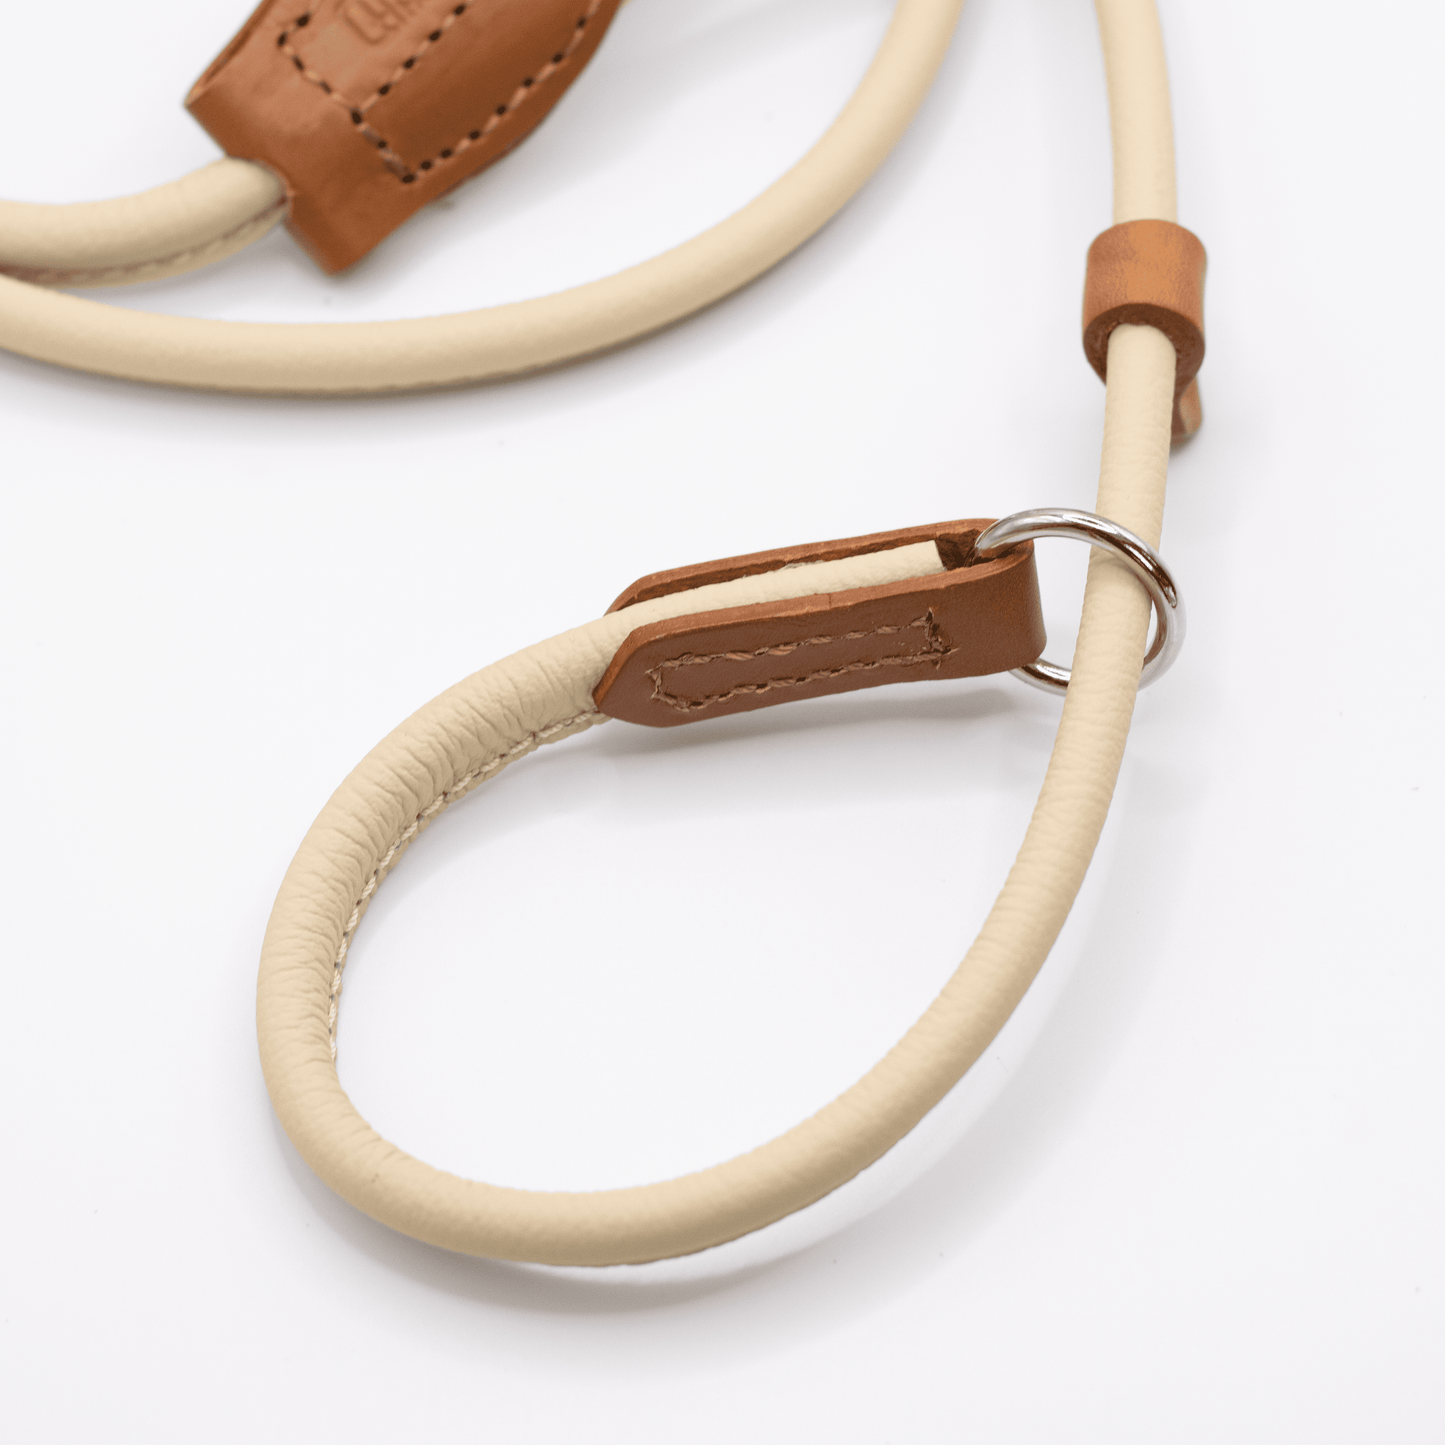 D&H Rolled Soft Leather Slip Lead Cream